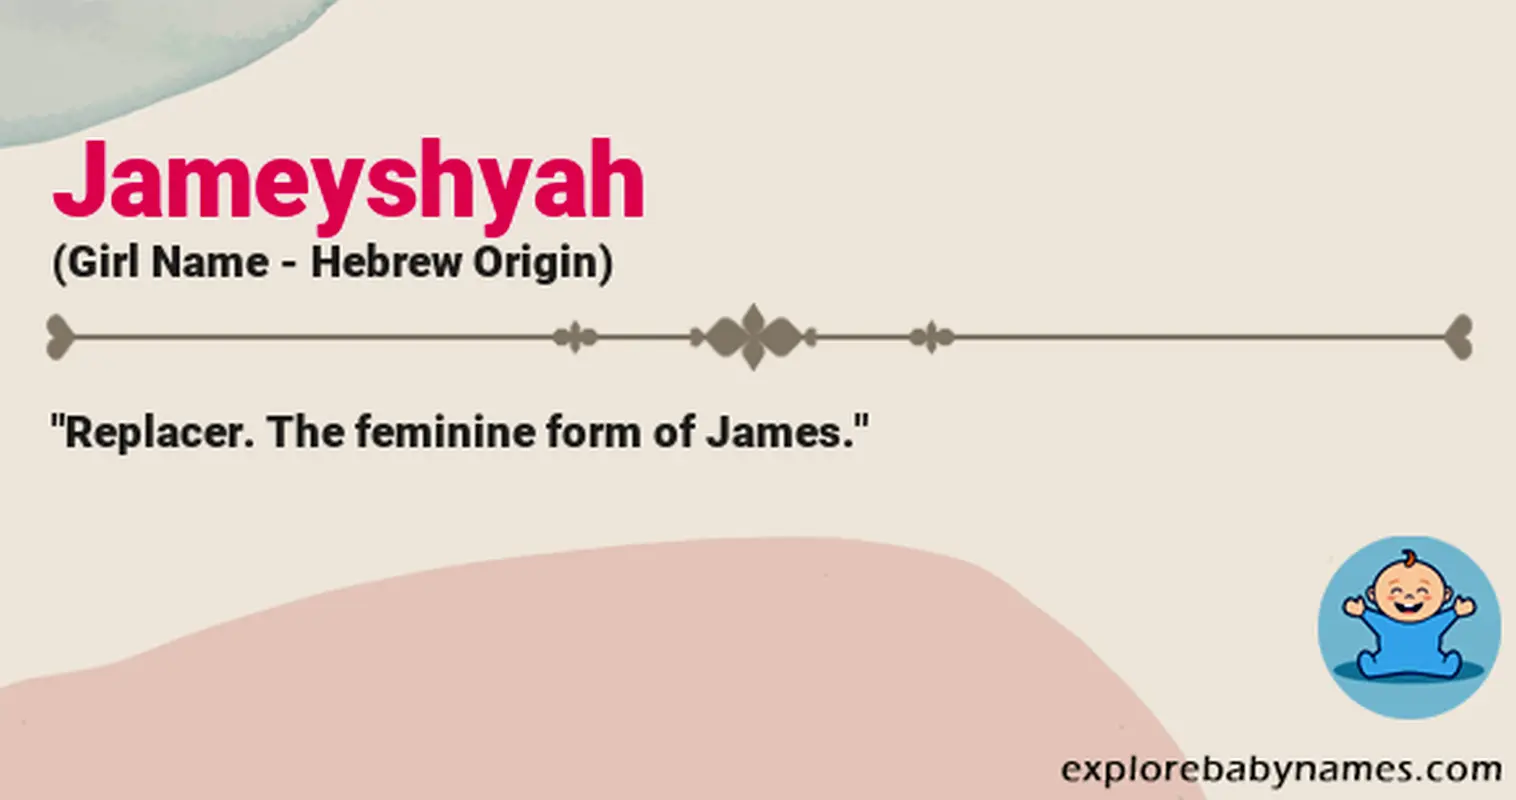 Meaning of Jameyshyah